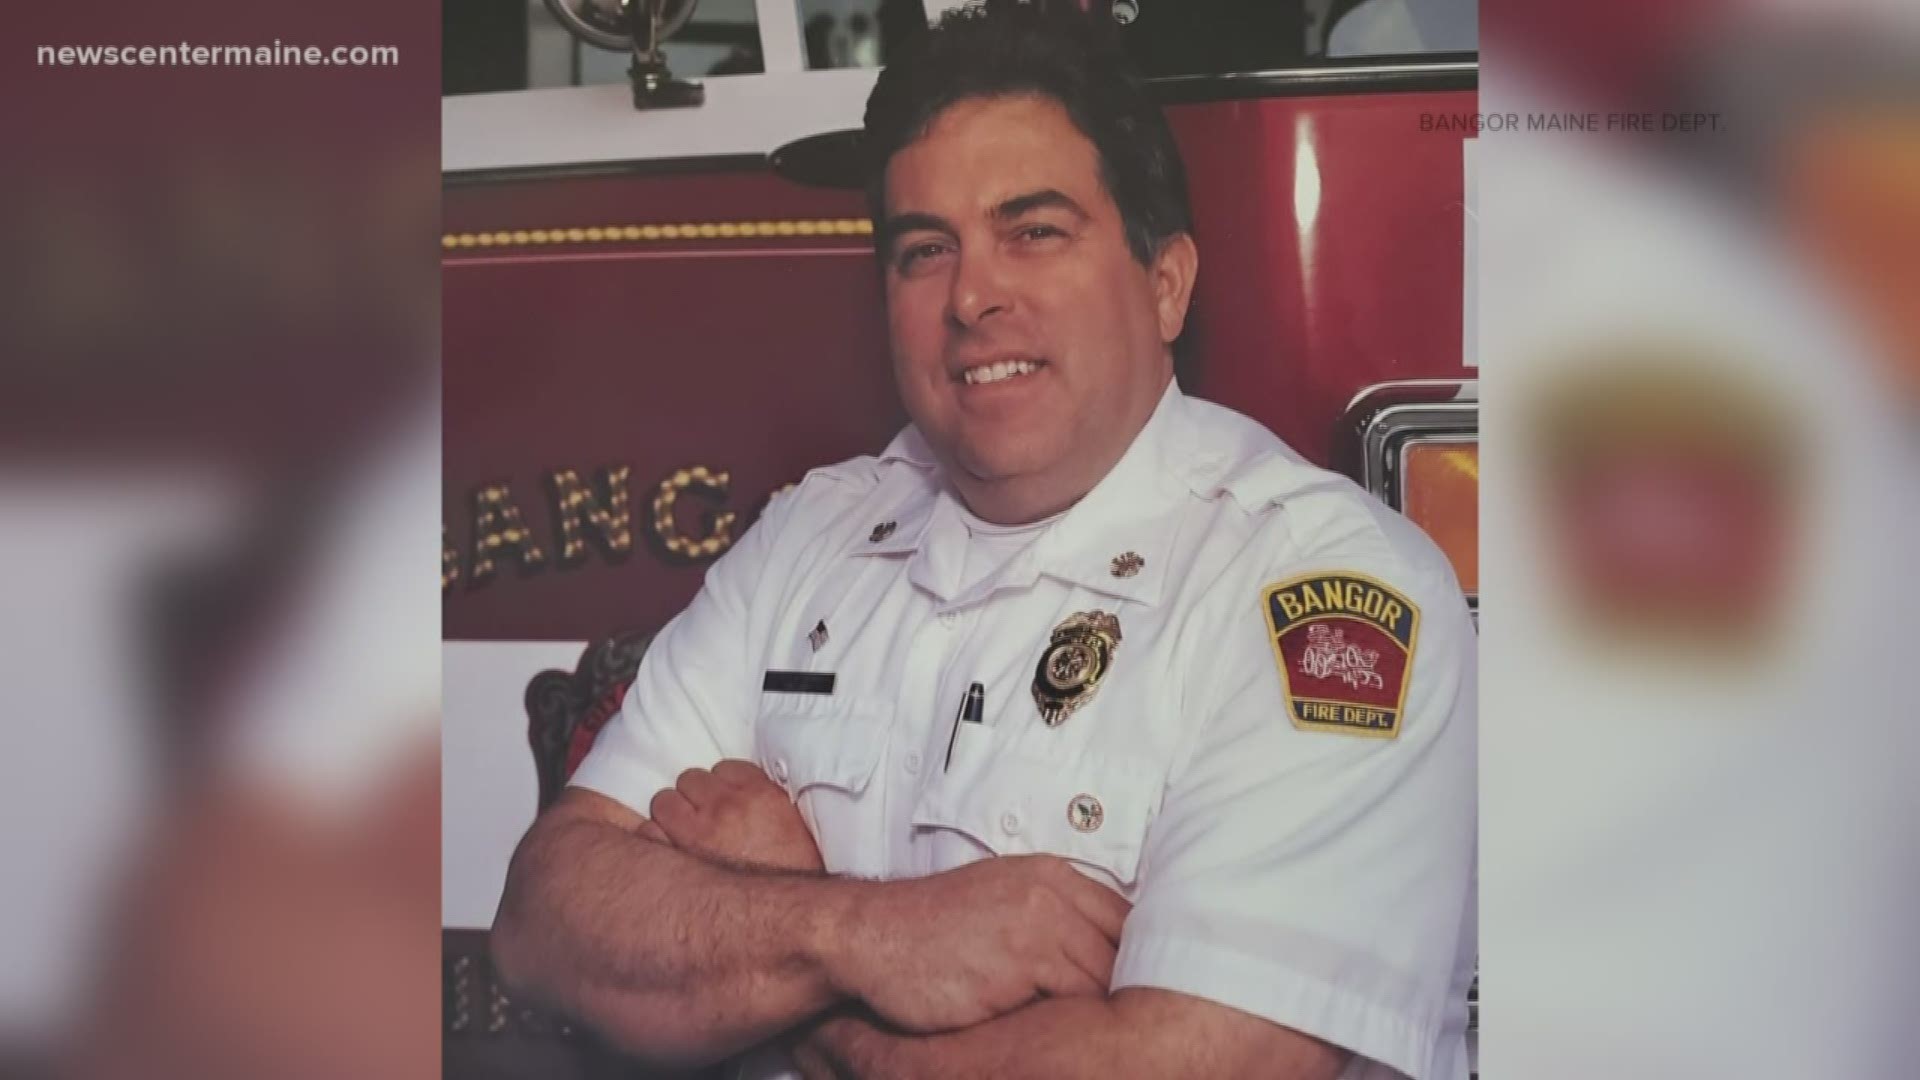 Flags will be at half staff on Friday in honor of former fire chief Jeffrey Cammack. Chief Cammack was with the Bangor Fire Department for more than 30 years.